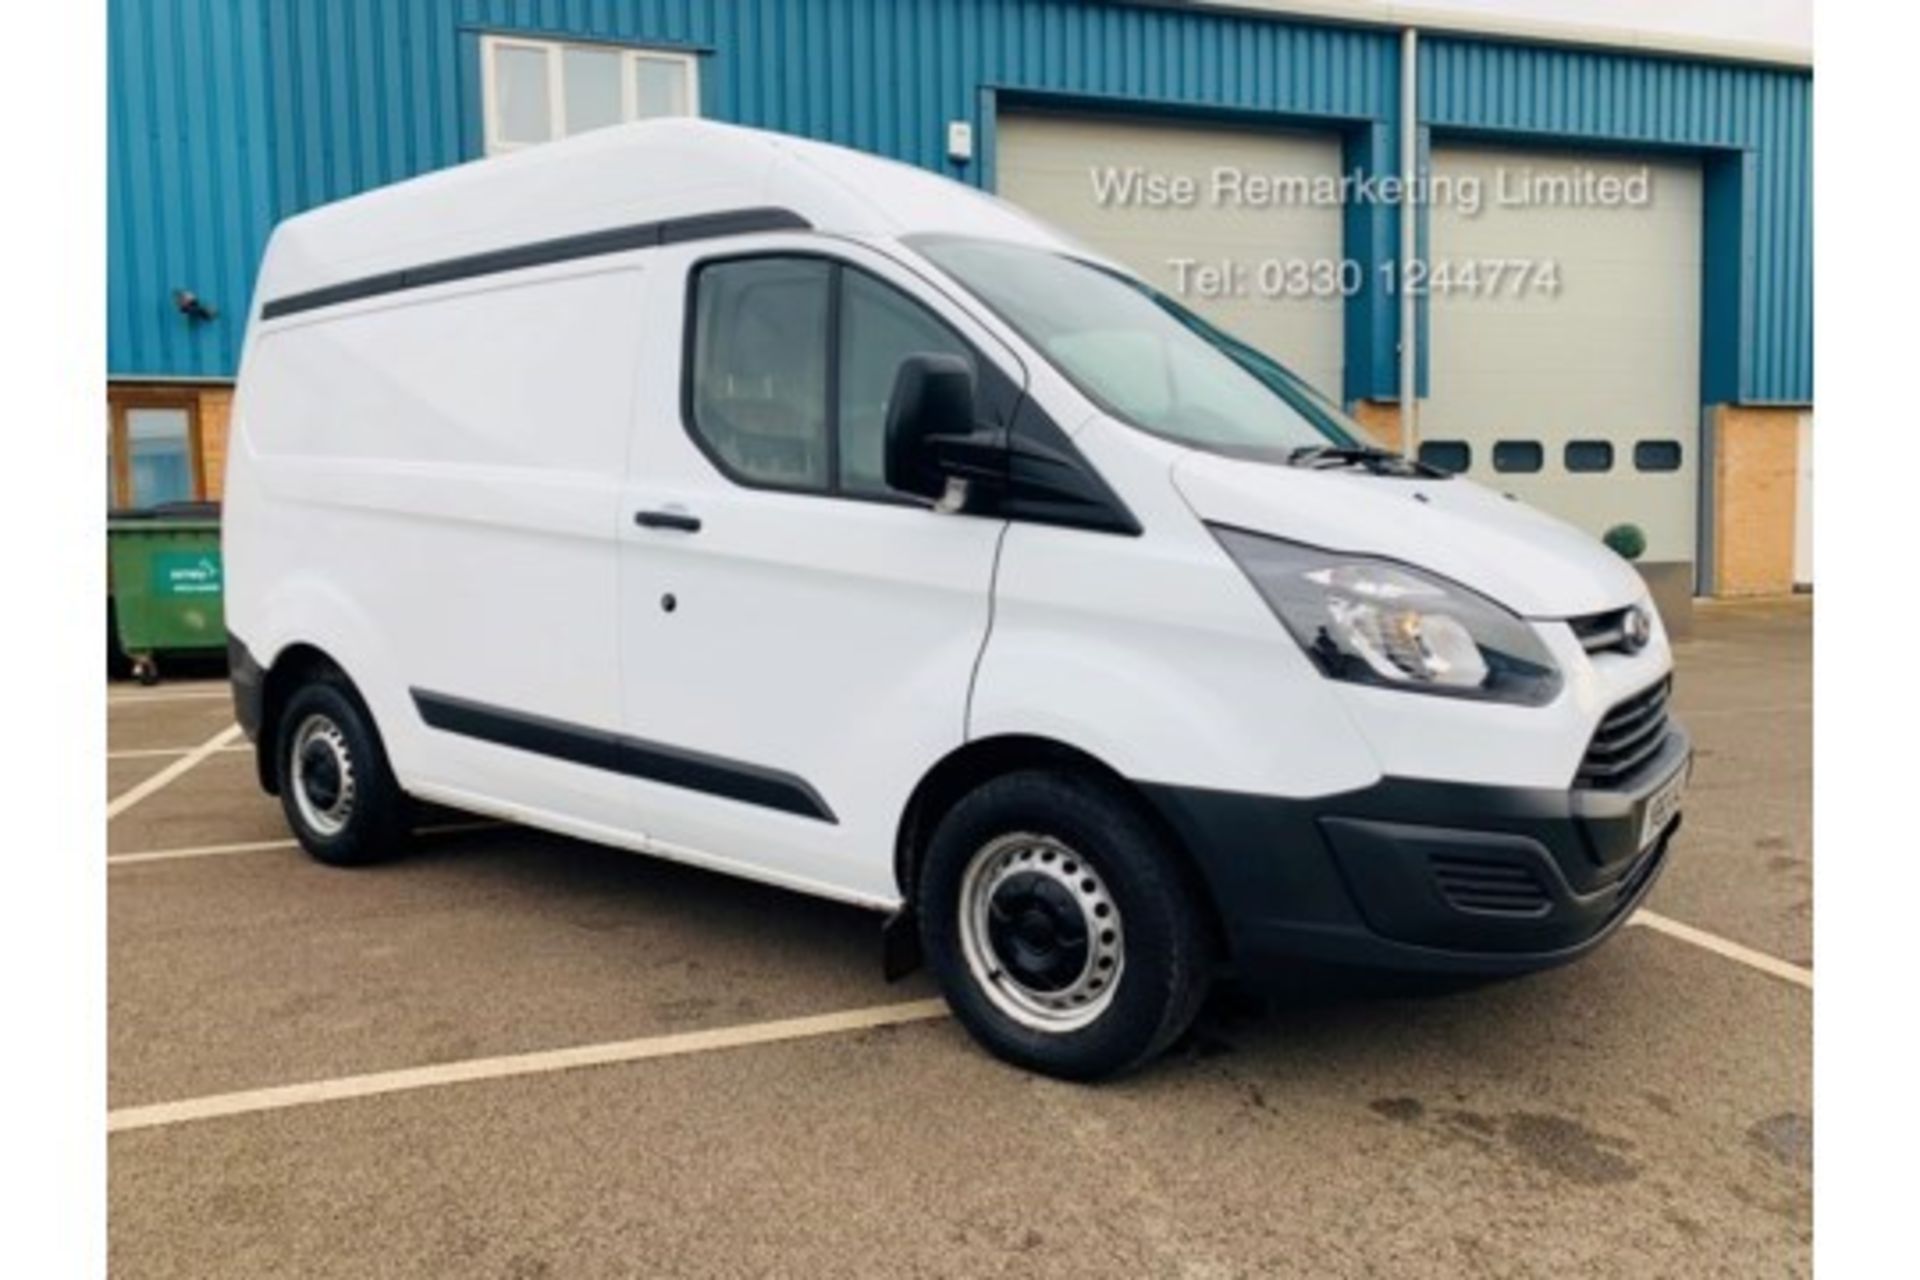 (RESERVE MET)Ford Transit Custom 2.2 TDCI 290 **HIGH ROOF** - 2016 model - AIR CON- 1 OWNER- FSH- - Image 5 of 18